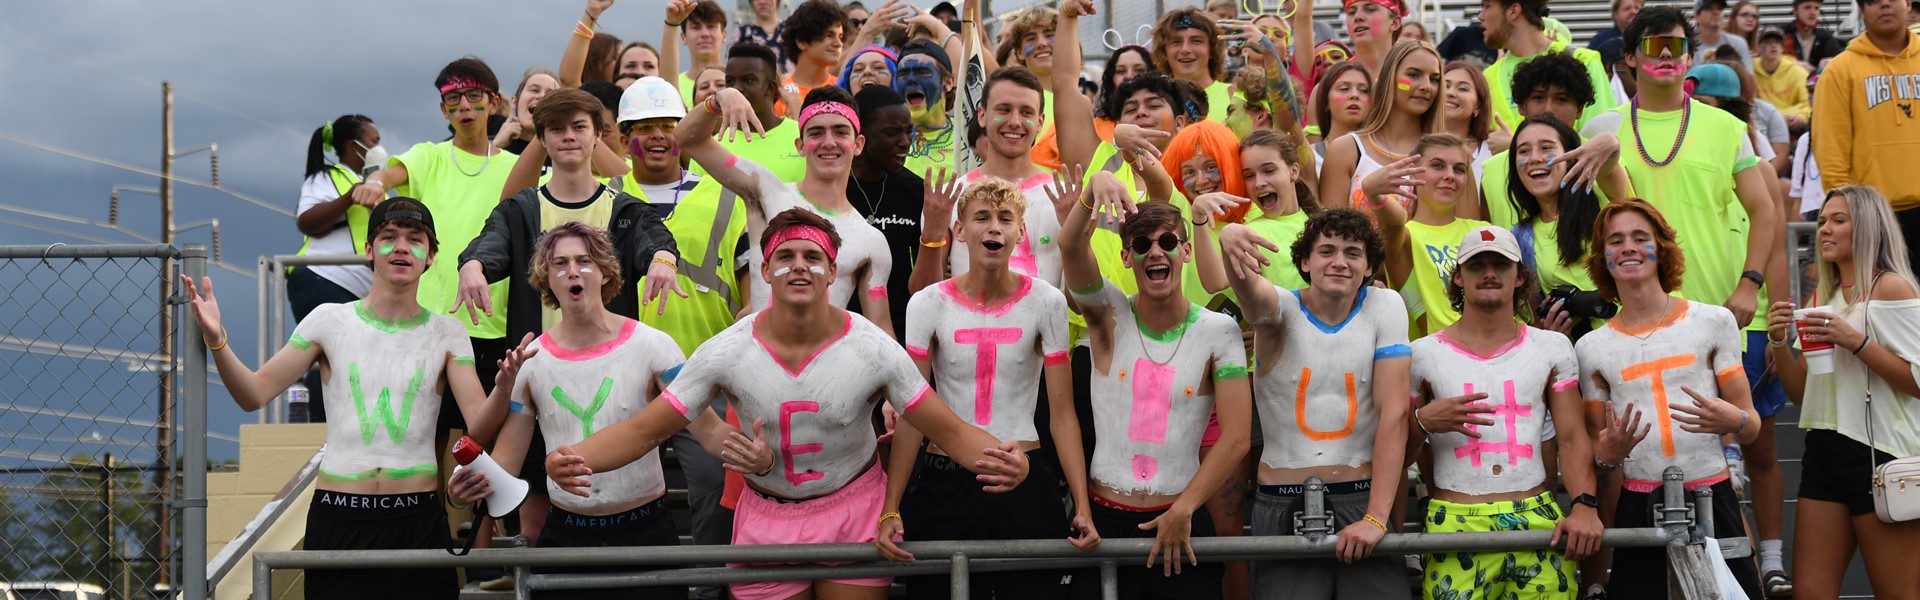 Best student section ever!